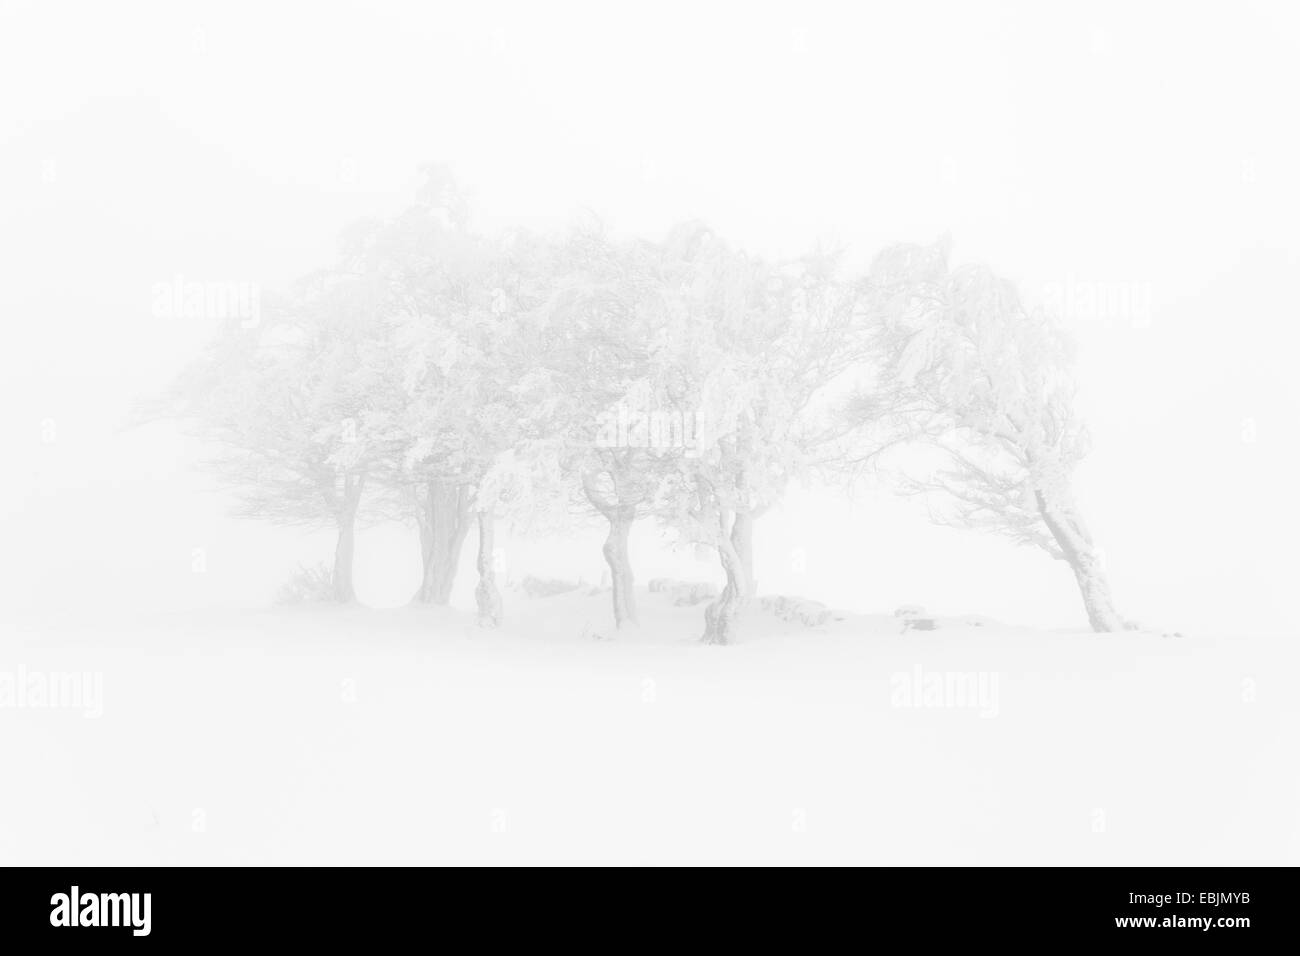 common beech (Fagus sylvatica), grove in dense fog in a snow-covered meadow landscape, Switzerland Stock Photo